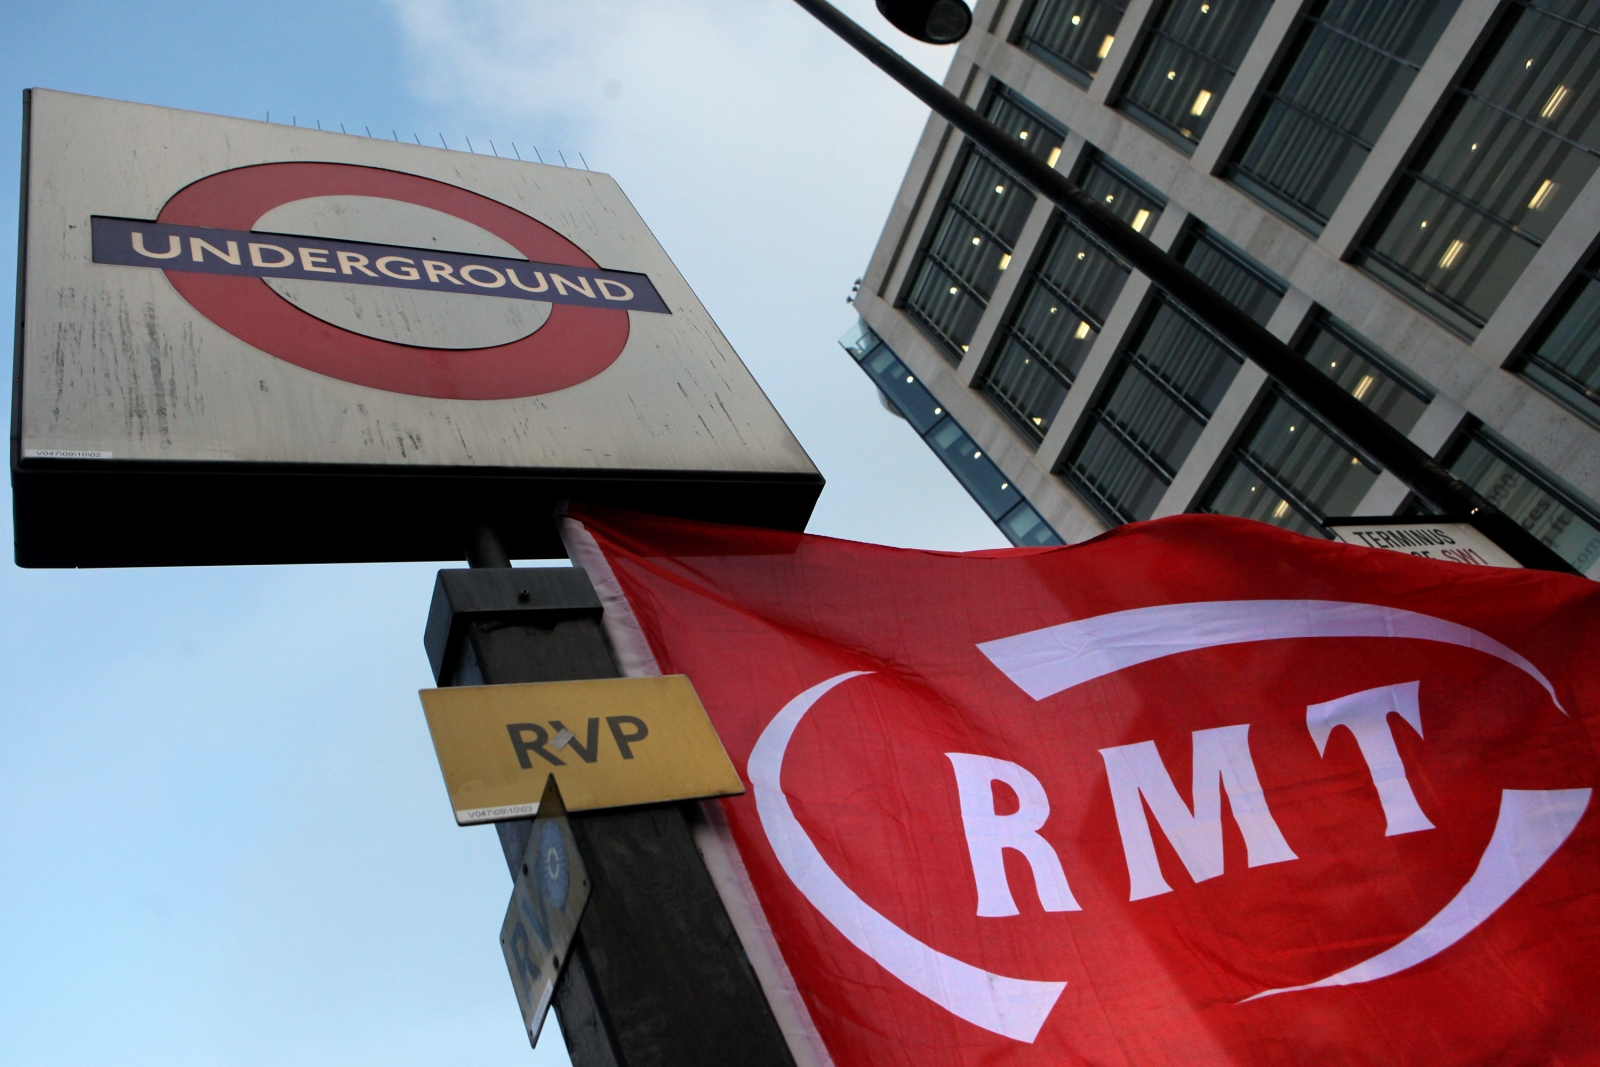 london-underground-faces-new-24-hour-strike-as-rmt-drivers-plan-central